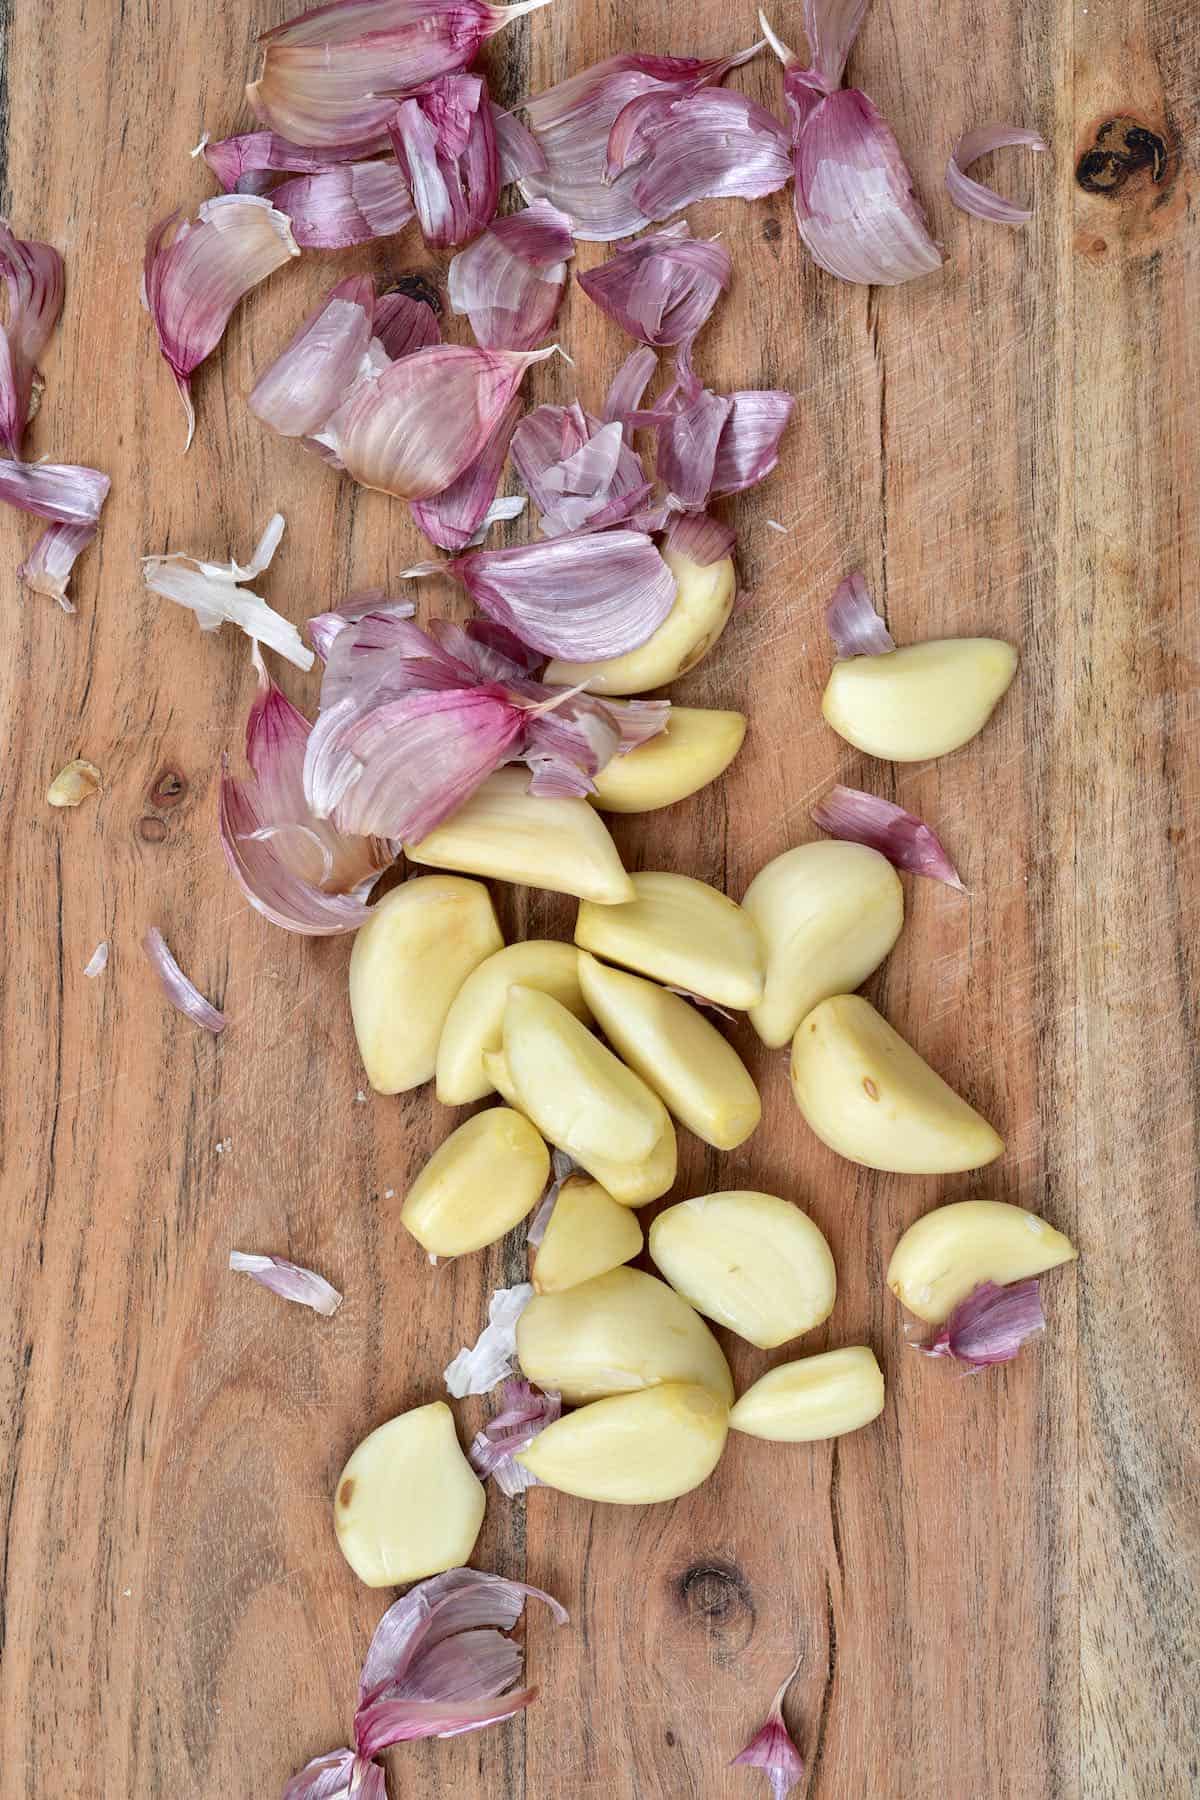 Some peeled garlic cloves and peels on a wooden board